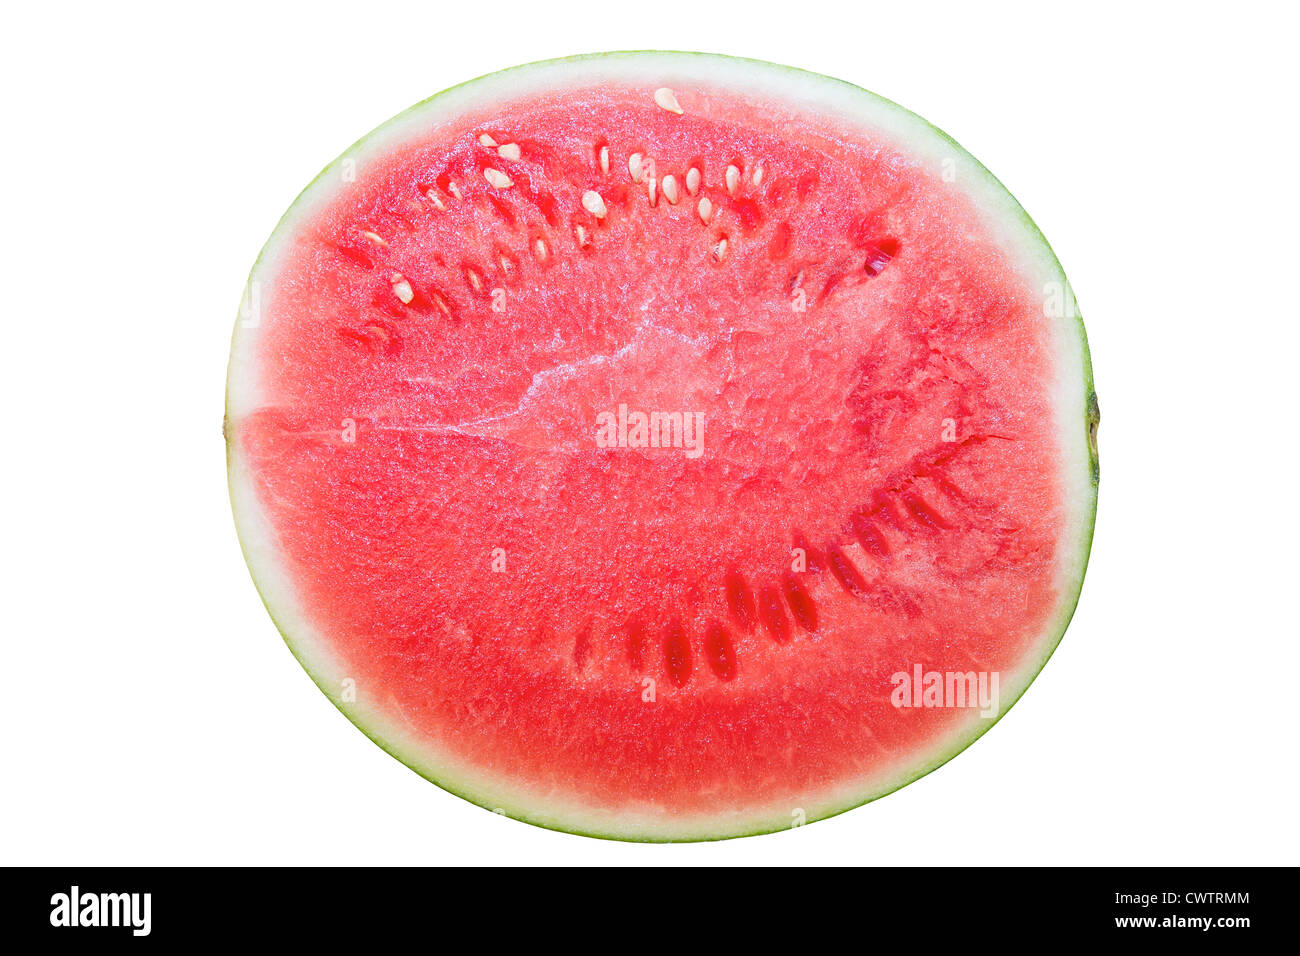 Seedless Watermelon Half Top View Isolated on White Background Stock Photo